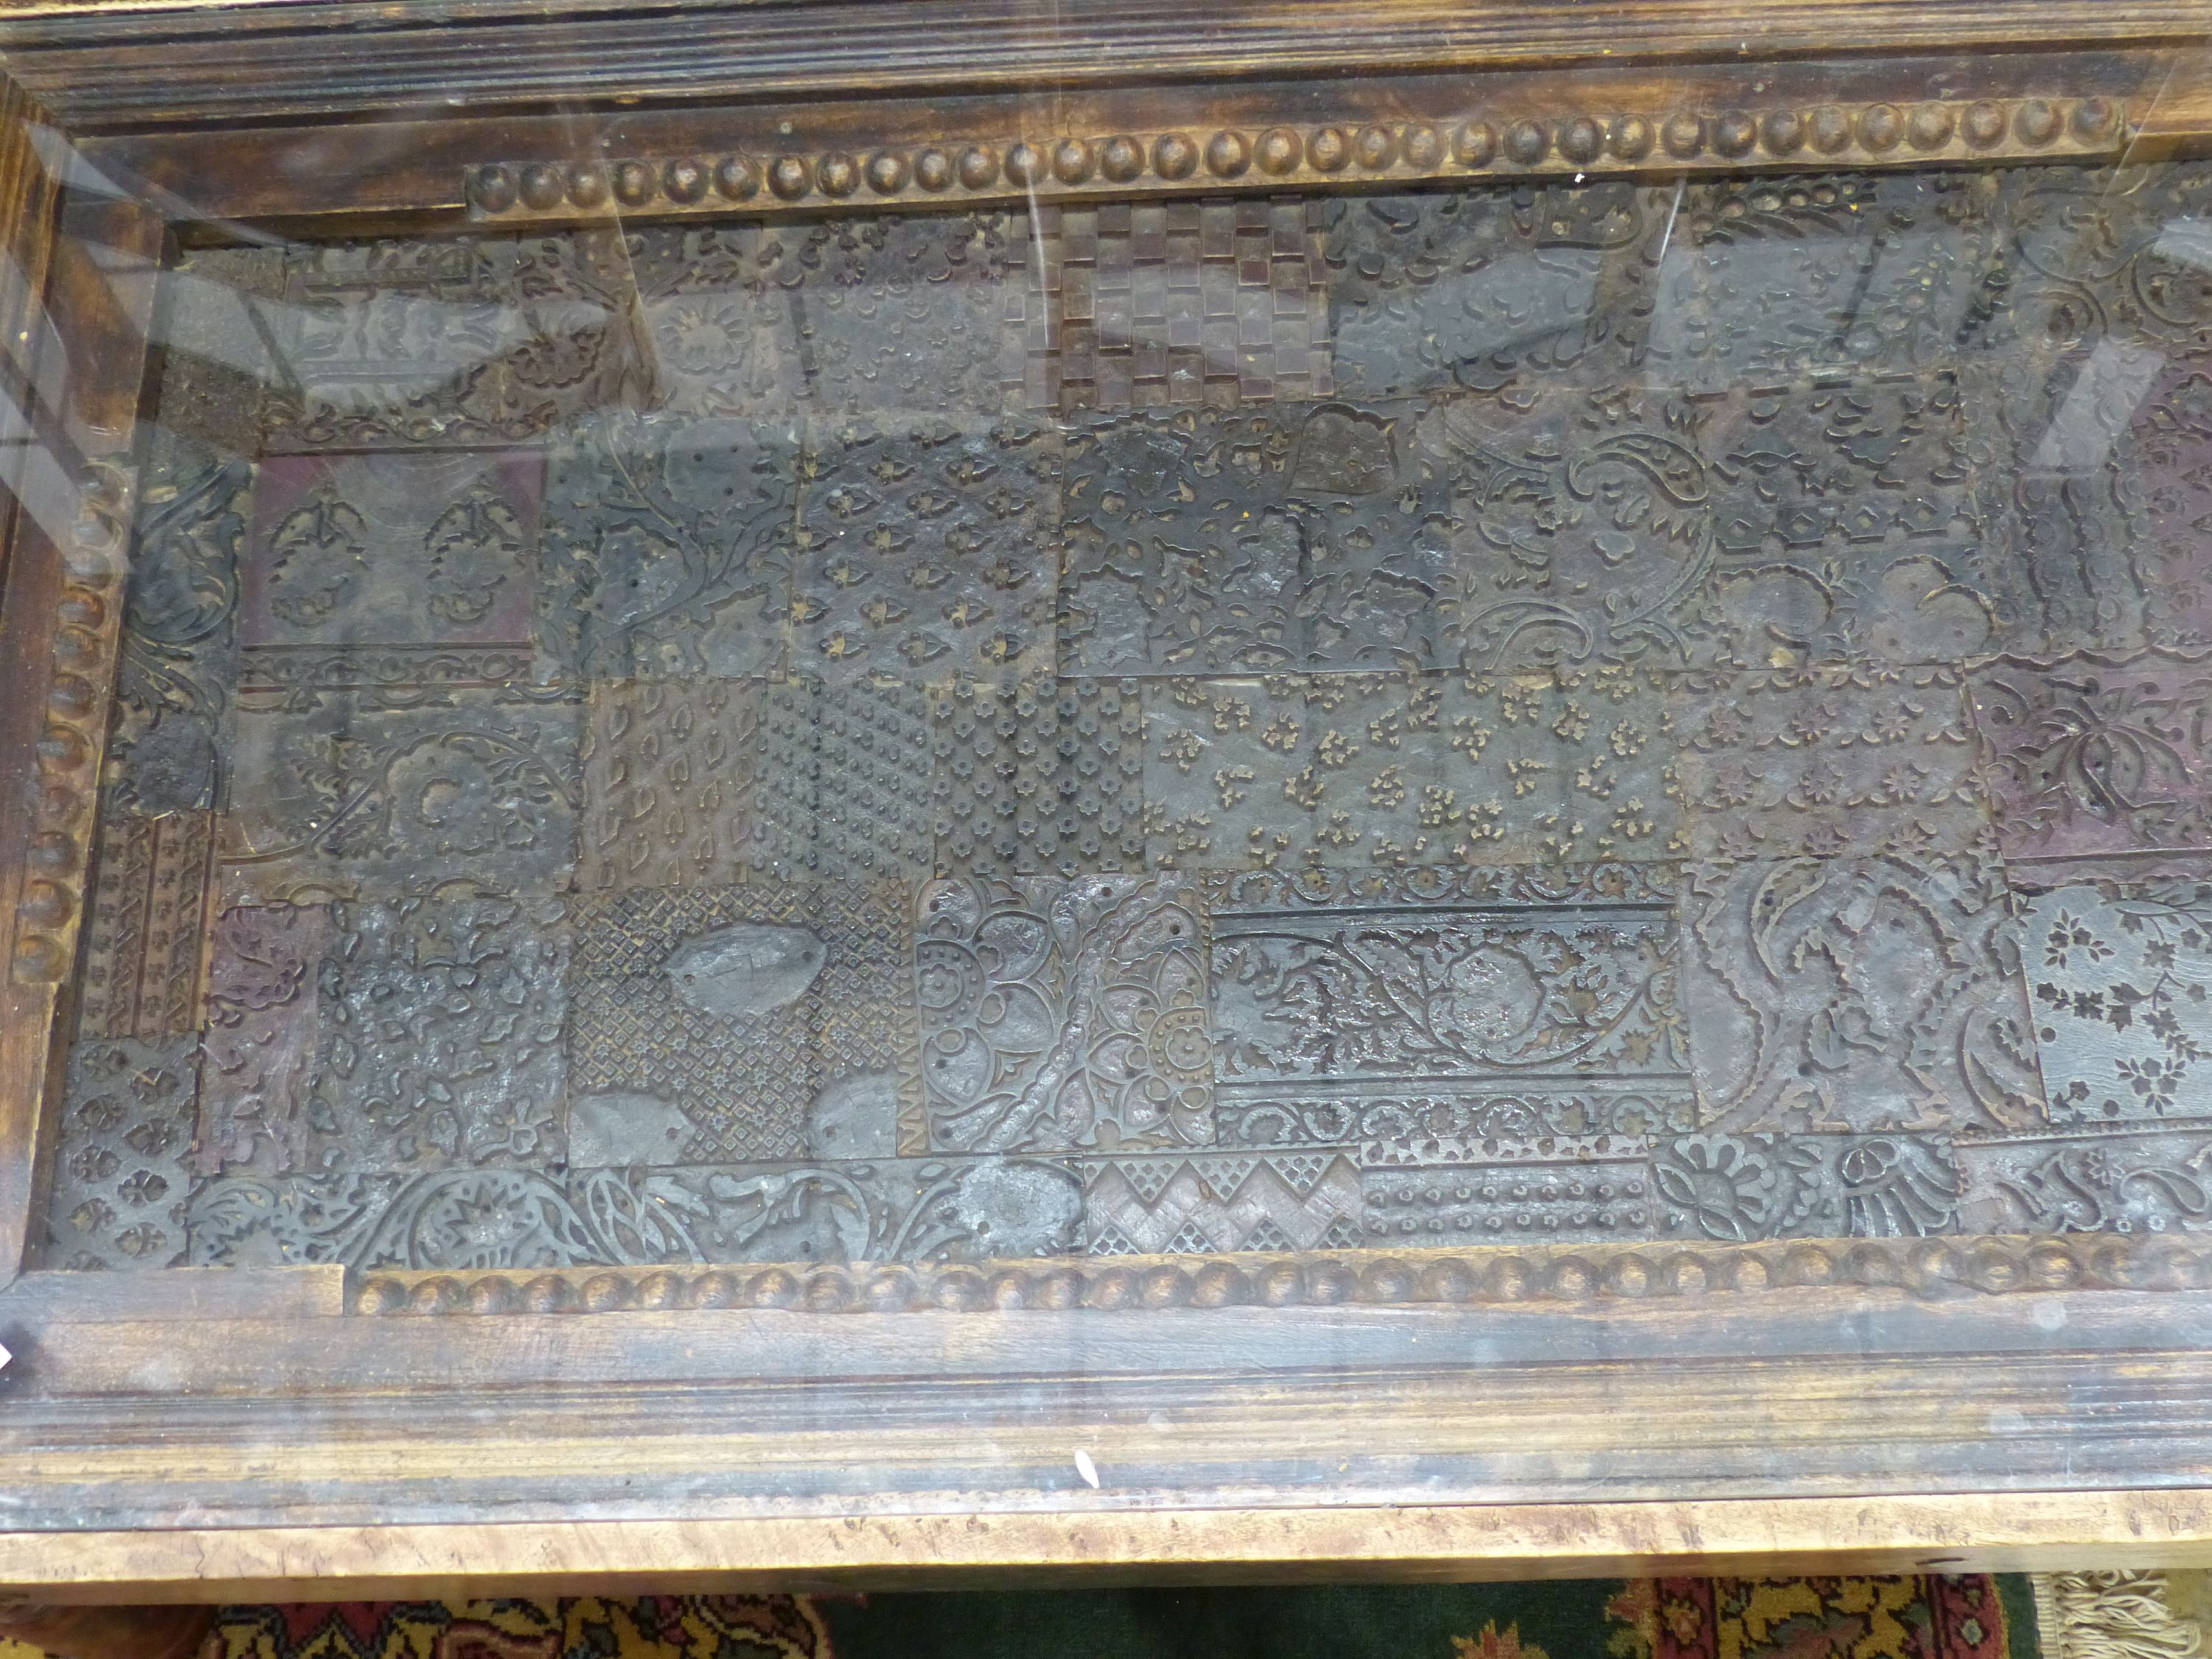 An Indian hardwood coffee table inset with a printing block, length 140cm, width 80cm